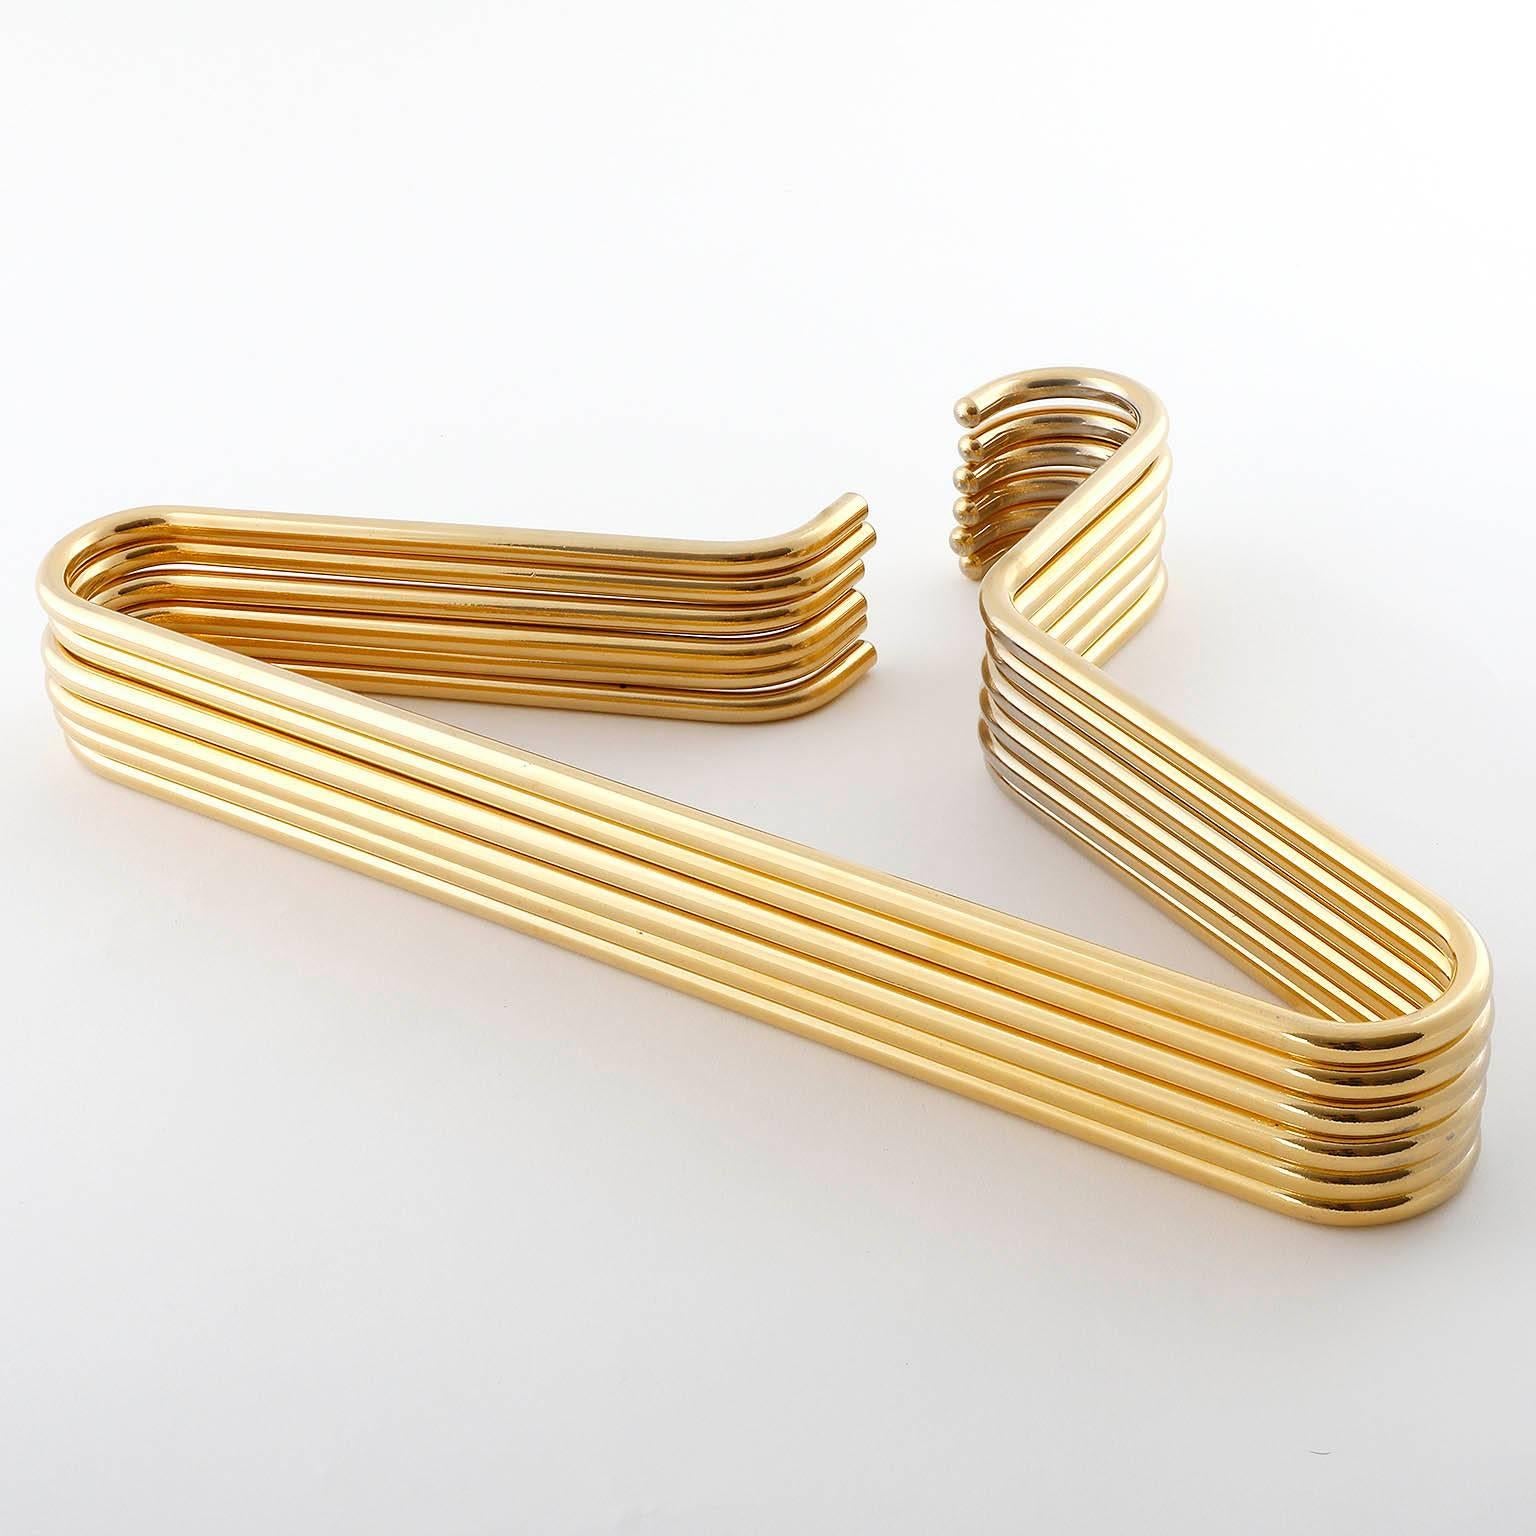 Late 20th Century Set of Six Carl Auböck Gold-Plated Coat Hangers, Austria, 1970s